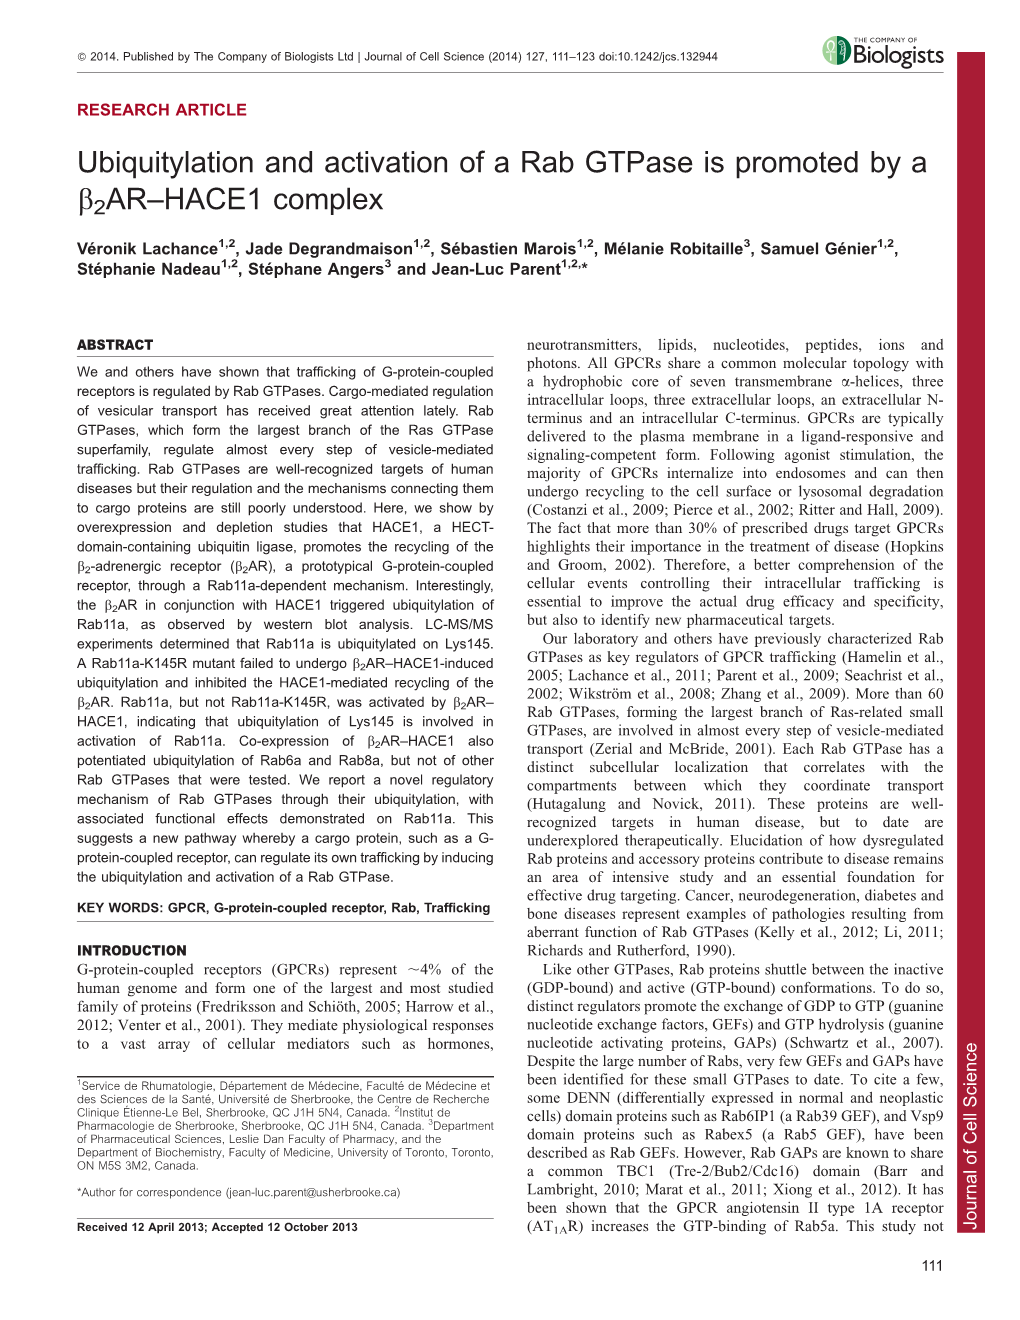 Ubiquitylation and Activation of a Rab Gtpase Is Promoted by a B2ar